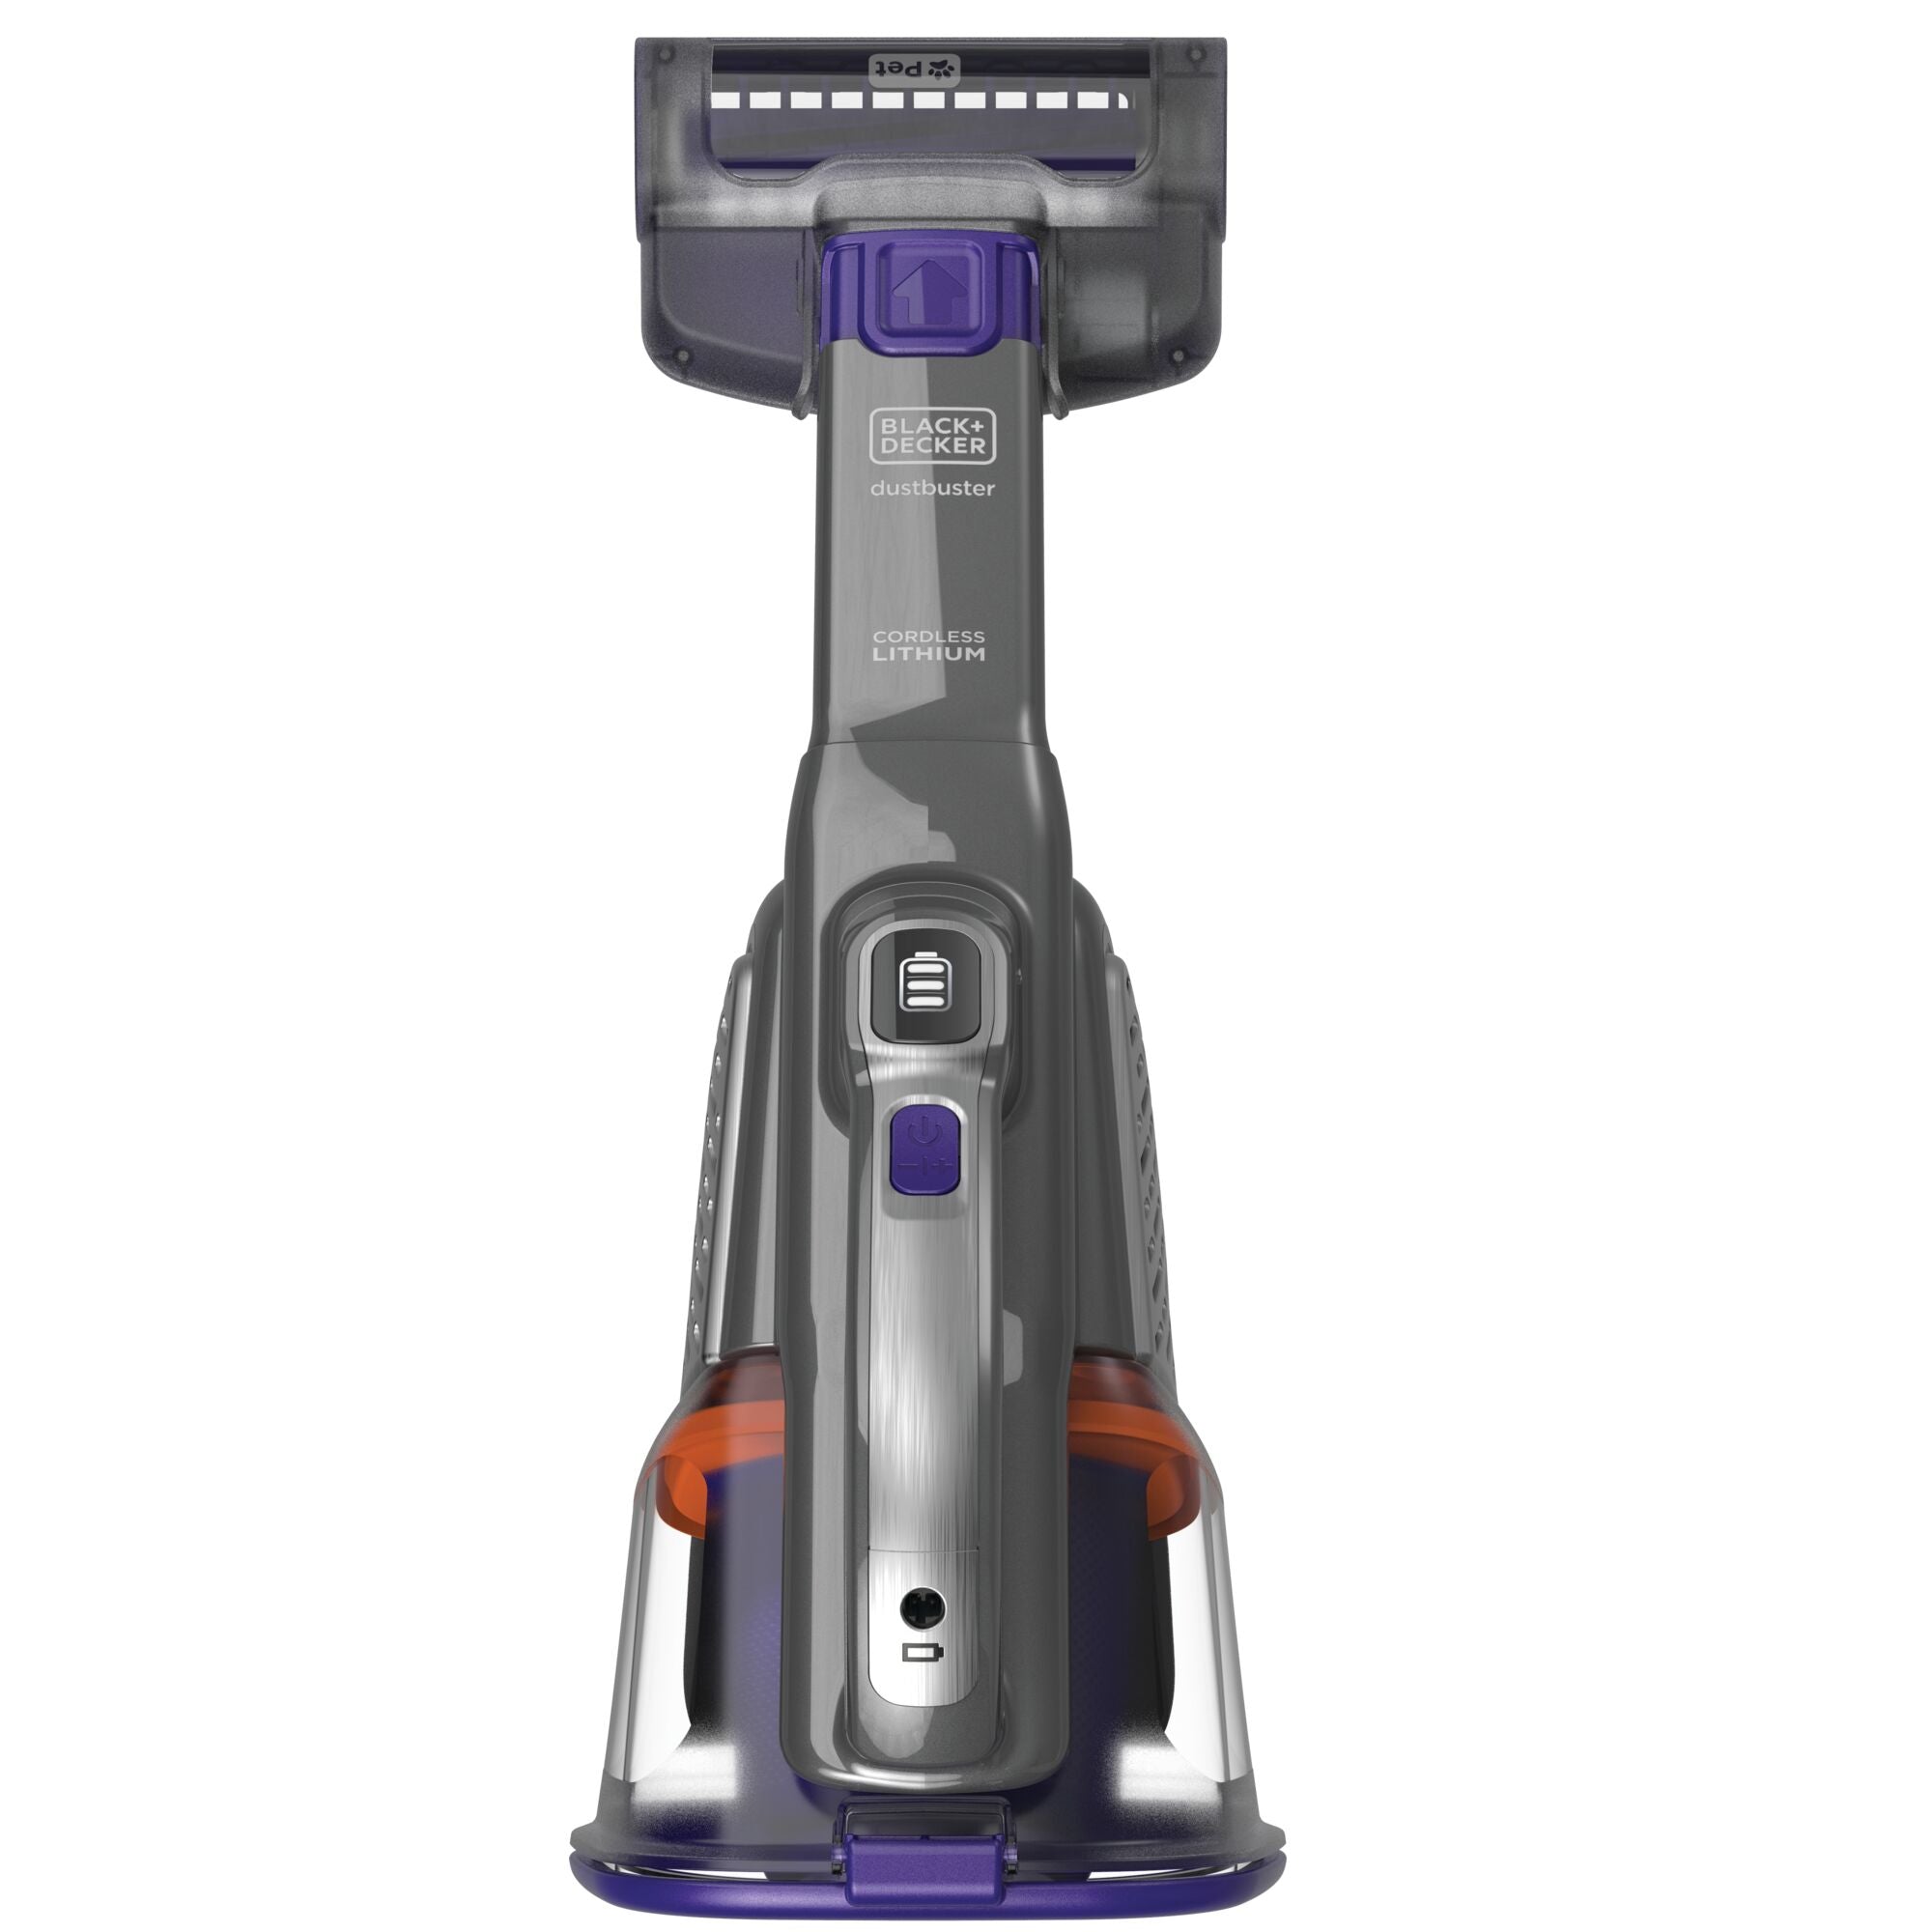 Washable filter and pre-filter feature of dustbuster Advanced Clean plus Pet Cordless Hand Vacuum.